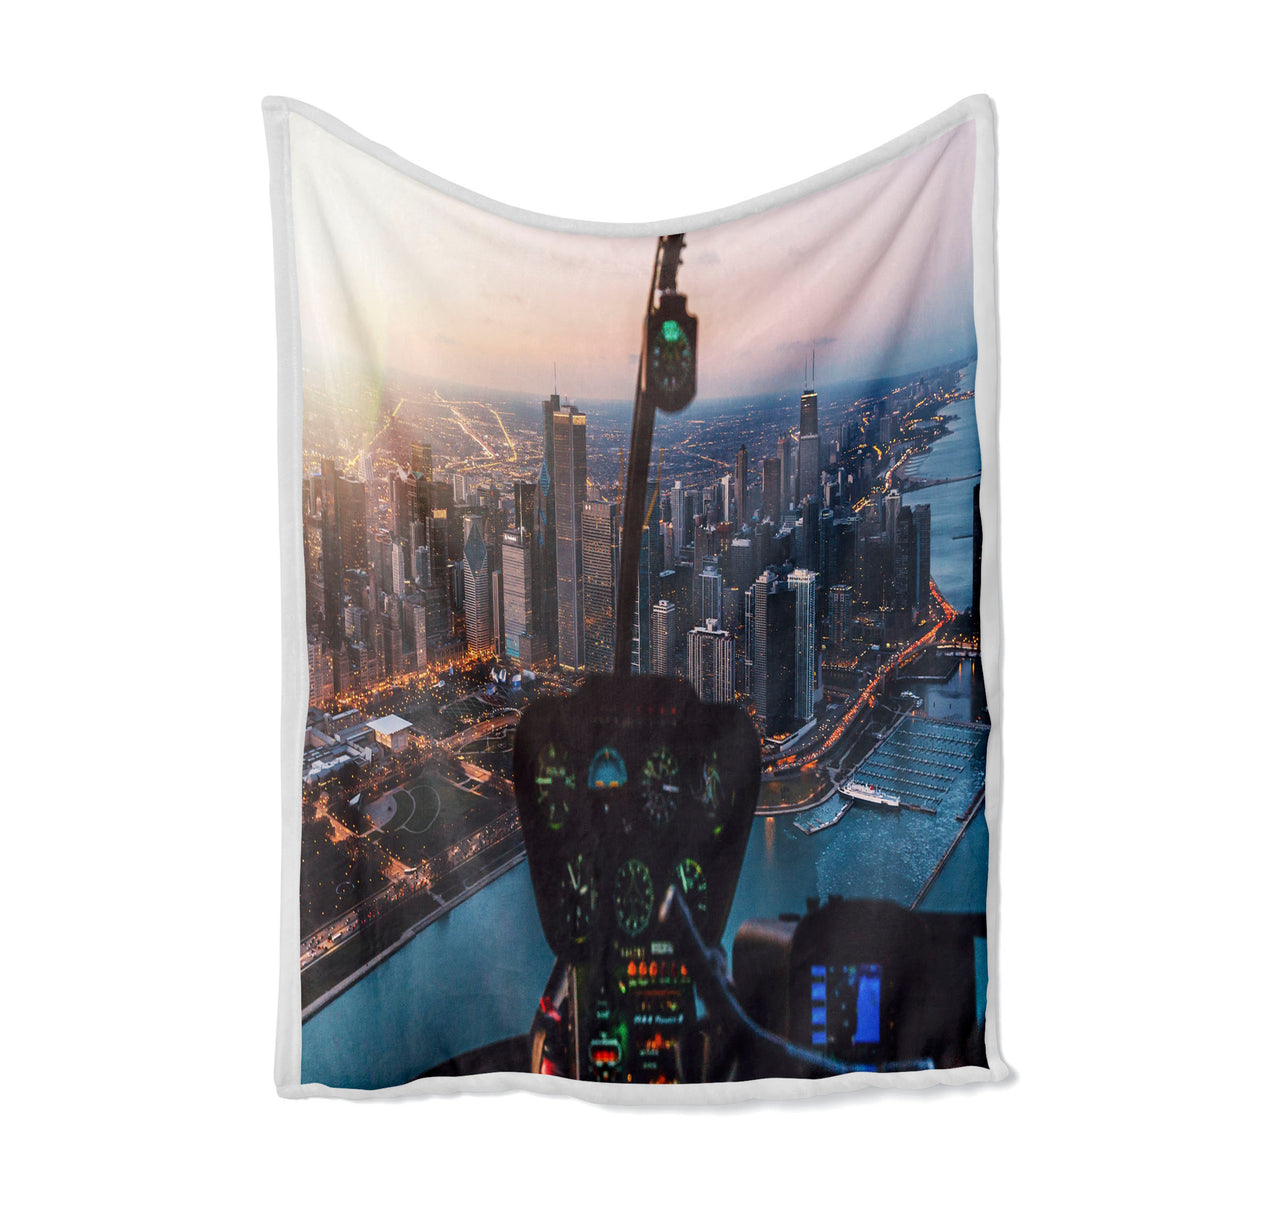 Amazing City View from Helicopter Cockpit Designed Bed Blankets & Covers